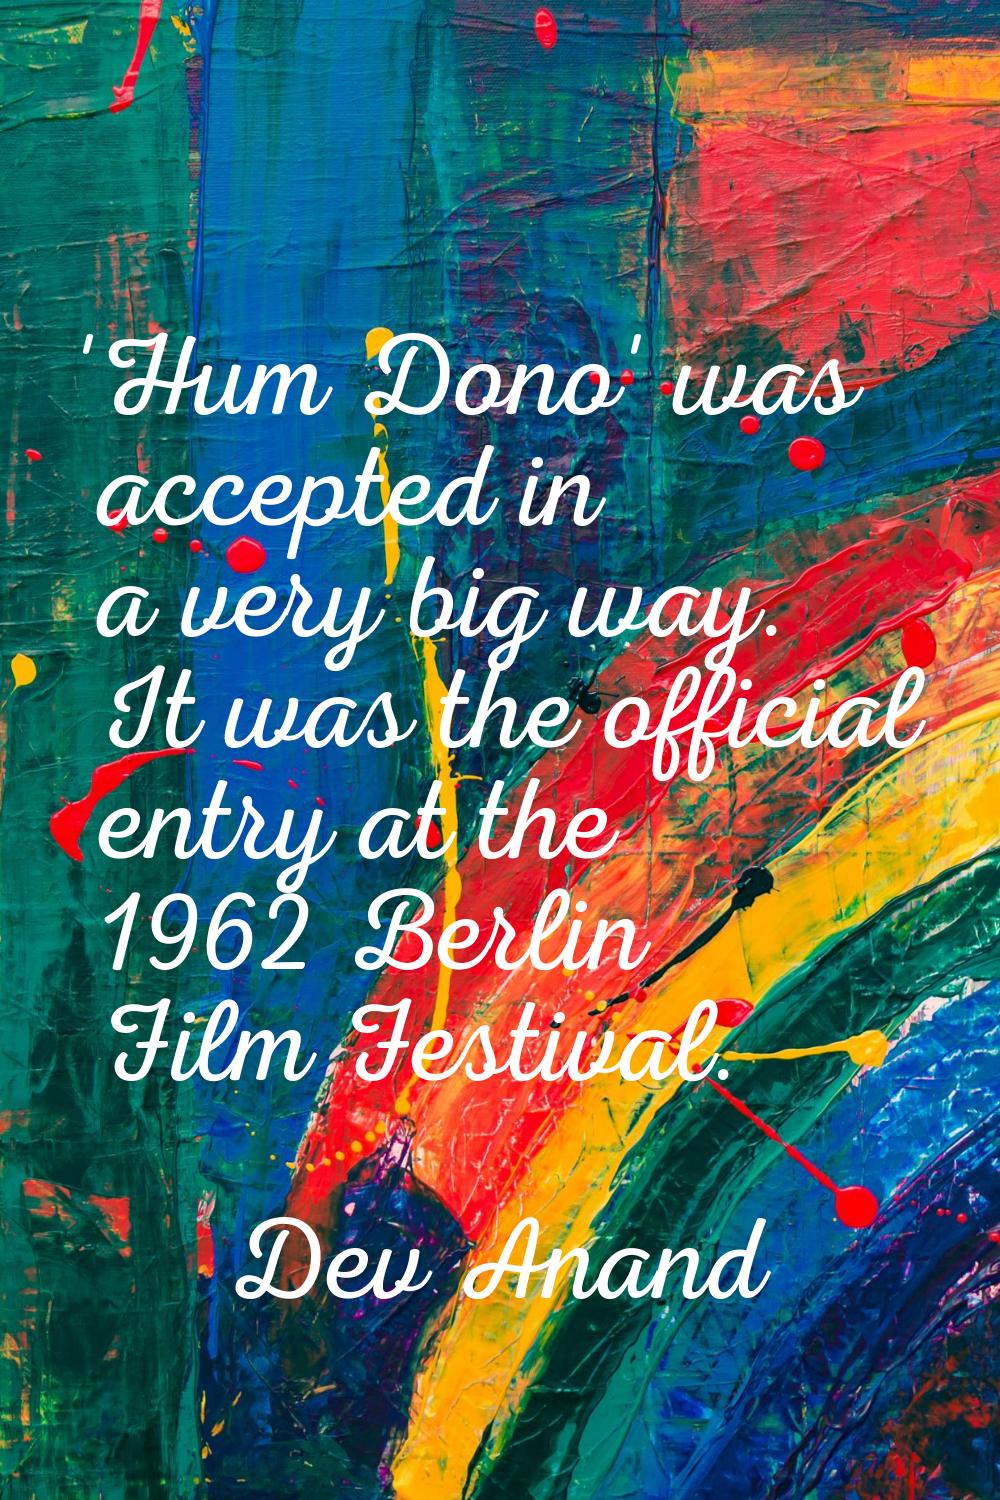 'Hum Dono' was accepted in a very big way. It was the official entry at the 1962 Berlin Film Festiv